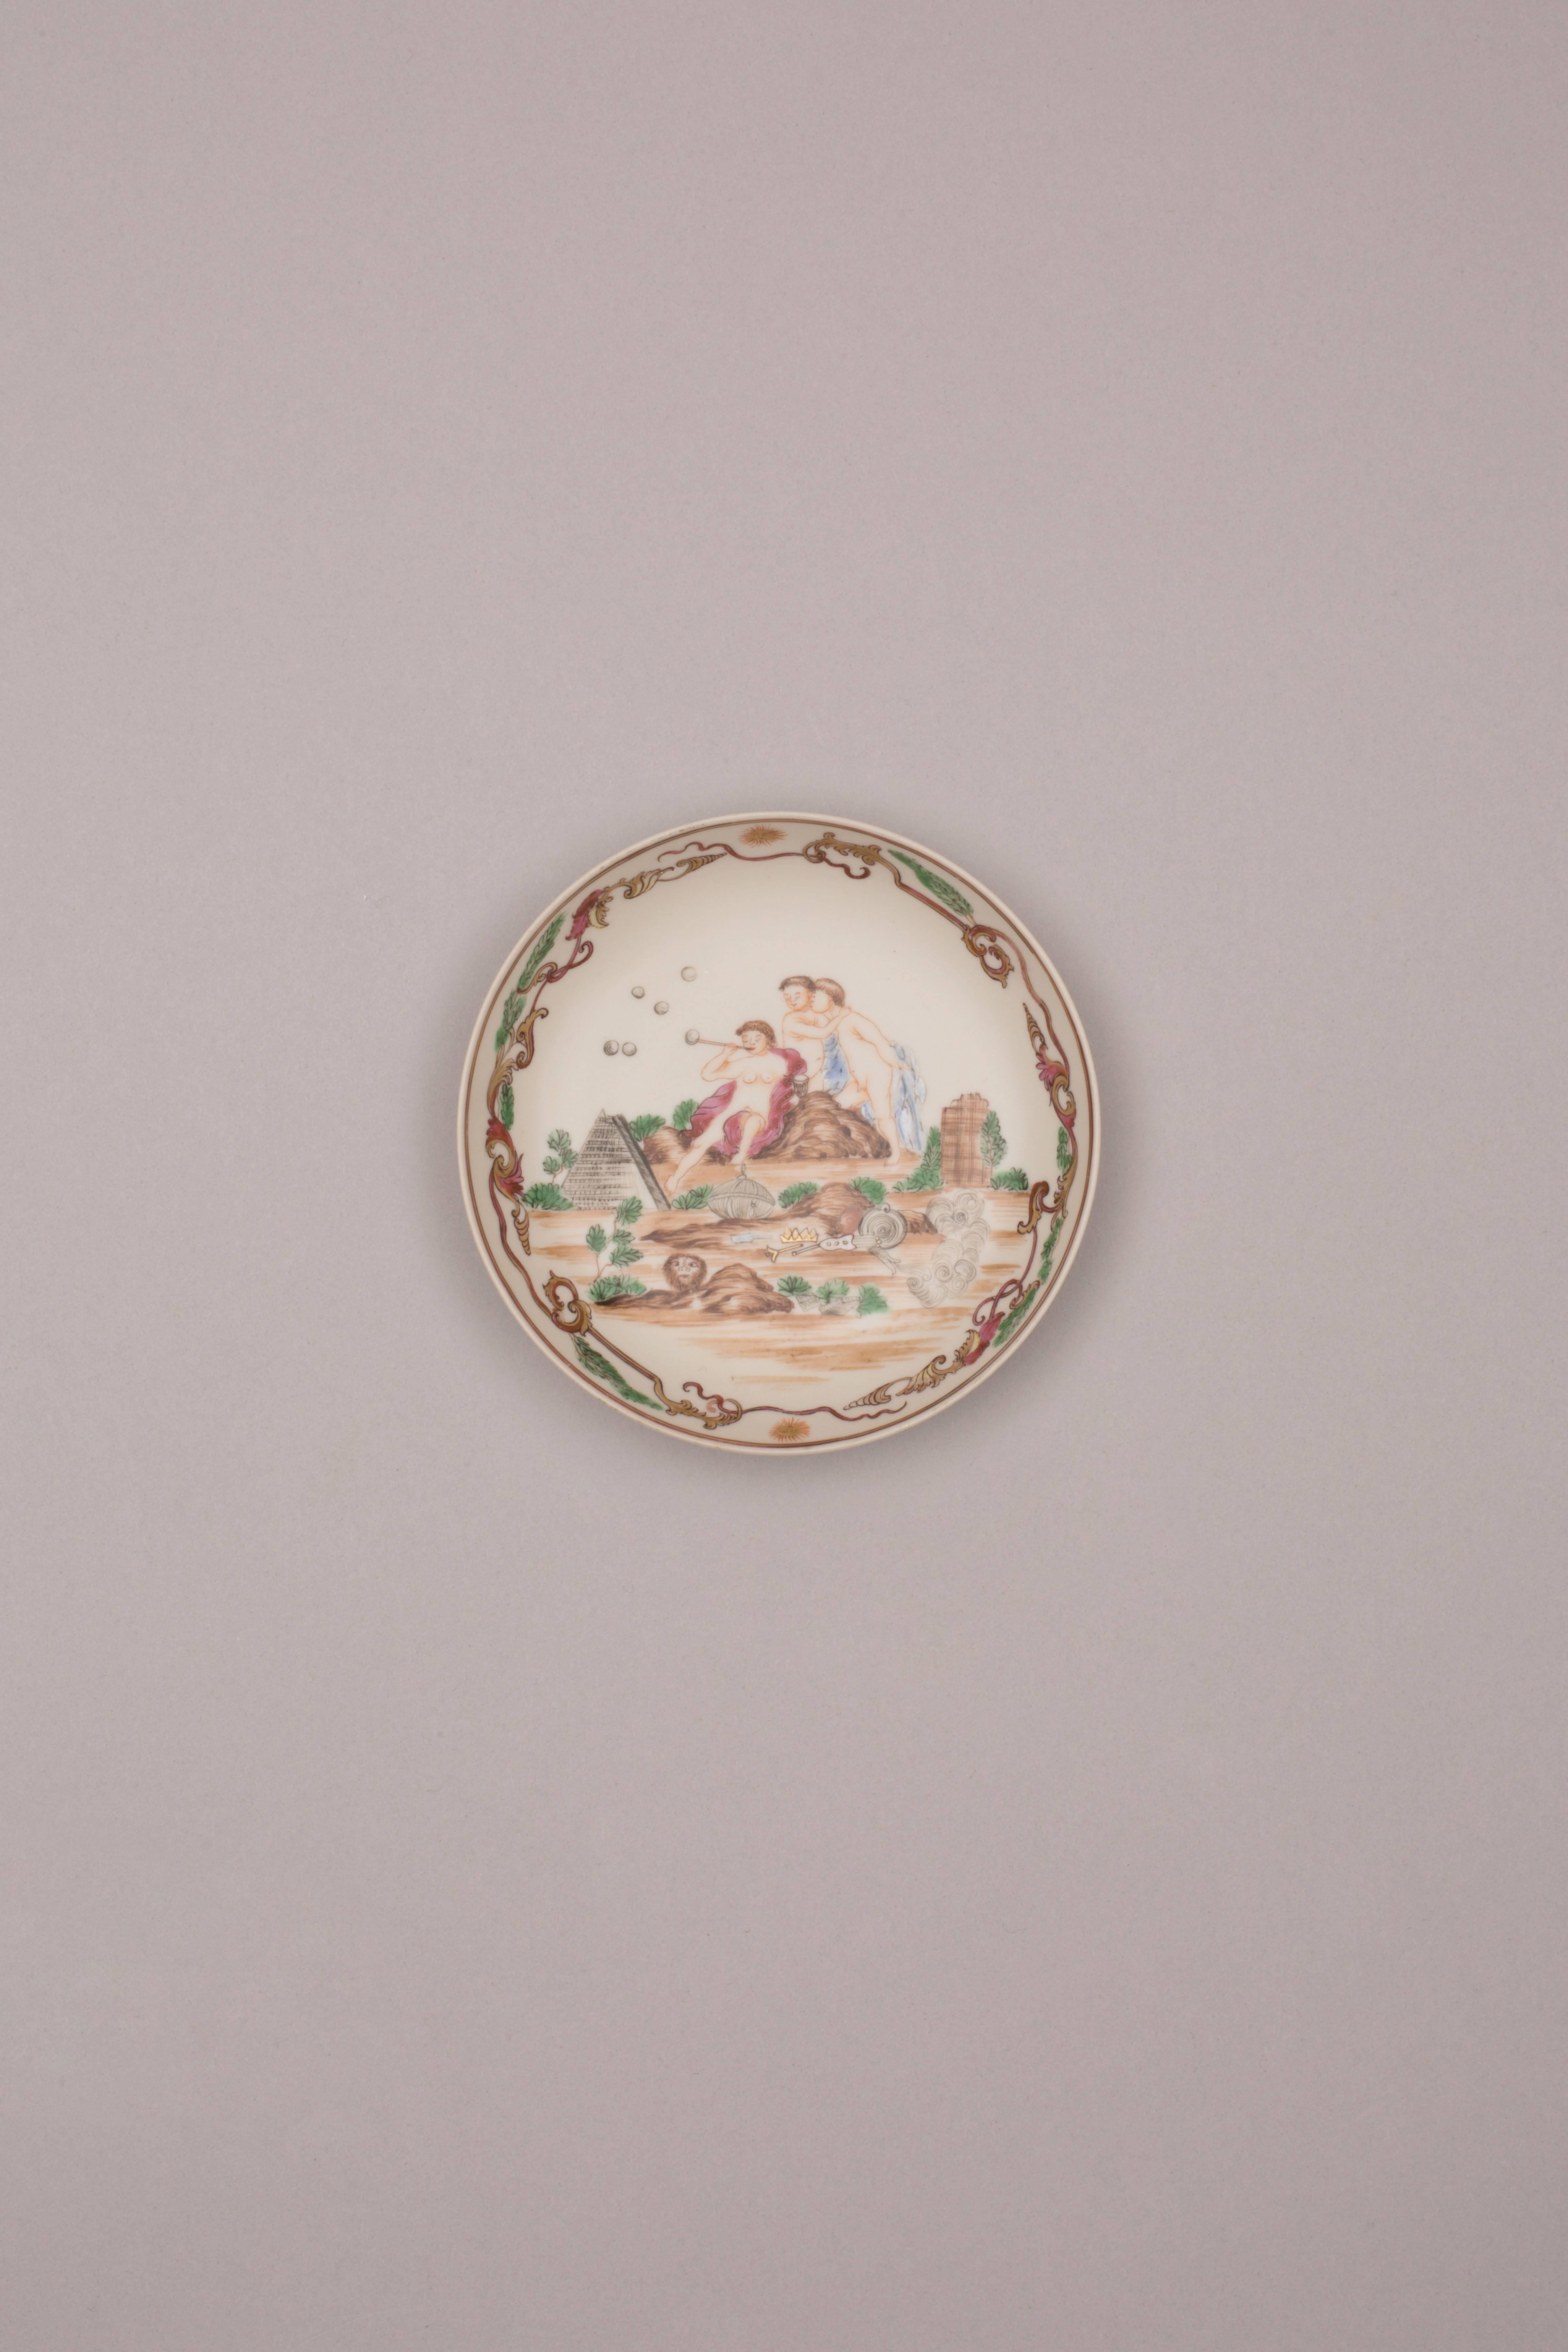 Qing Chinese Export Porcelain Famille Rose Tea Bowl and Saucer, 18th Century For Sale